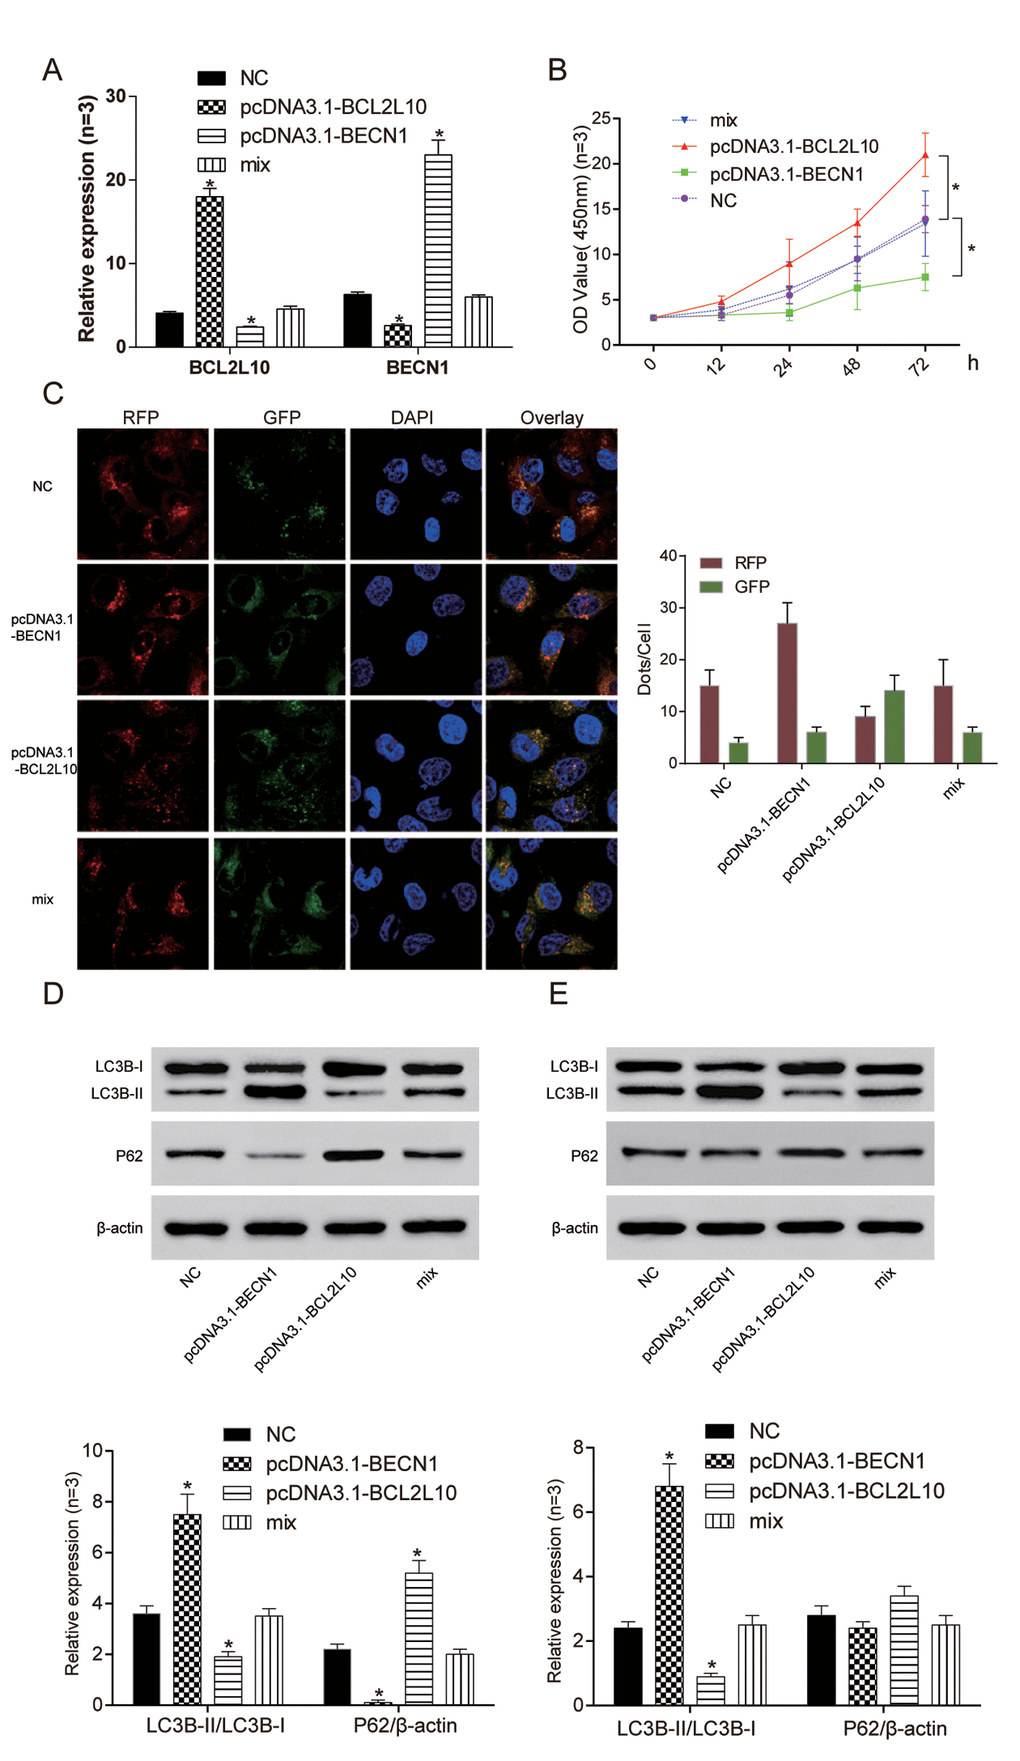 Overexpression of BCL2L10 inhibited autophagy of Hep3B cells by binding to BECN1. (A) The expression of BCL2L10 and BECN1 after transfection in four different groups was detected by qRT-PCR. (B) The cell viability of pcDNA3.1-BECN1 group was the weakest, while the cell viability of pcDNA3.1-BCL2L10 group was the strongest. (C) Overexpression of BECN1 facilitated the accumulation of LC3B puncta in Hep3B cells as detected by immunofluorescence. (D) The expression of LC3B-II/LC3B-I in pcDNA3.1-BCL2L10 group was decreased while the expression of LC3B-II/LC3B-I in pcDNA3.1-BECN1 group was increased. The changes of P62 had a contrary trend with changes of LC3B-II/LC3B-I. (E) Degradation of P62 was little observed in the presence of Bafilomycin A1 (an inhibitor of late-phase autophagy), while LC3B-II/LC3B-I expression was increased in Hep3B cells. * P 